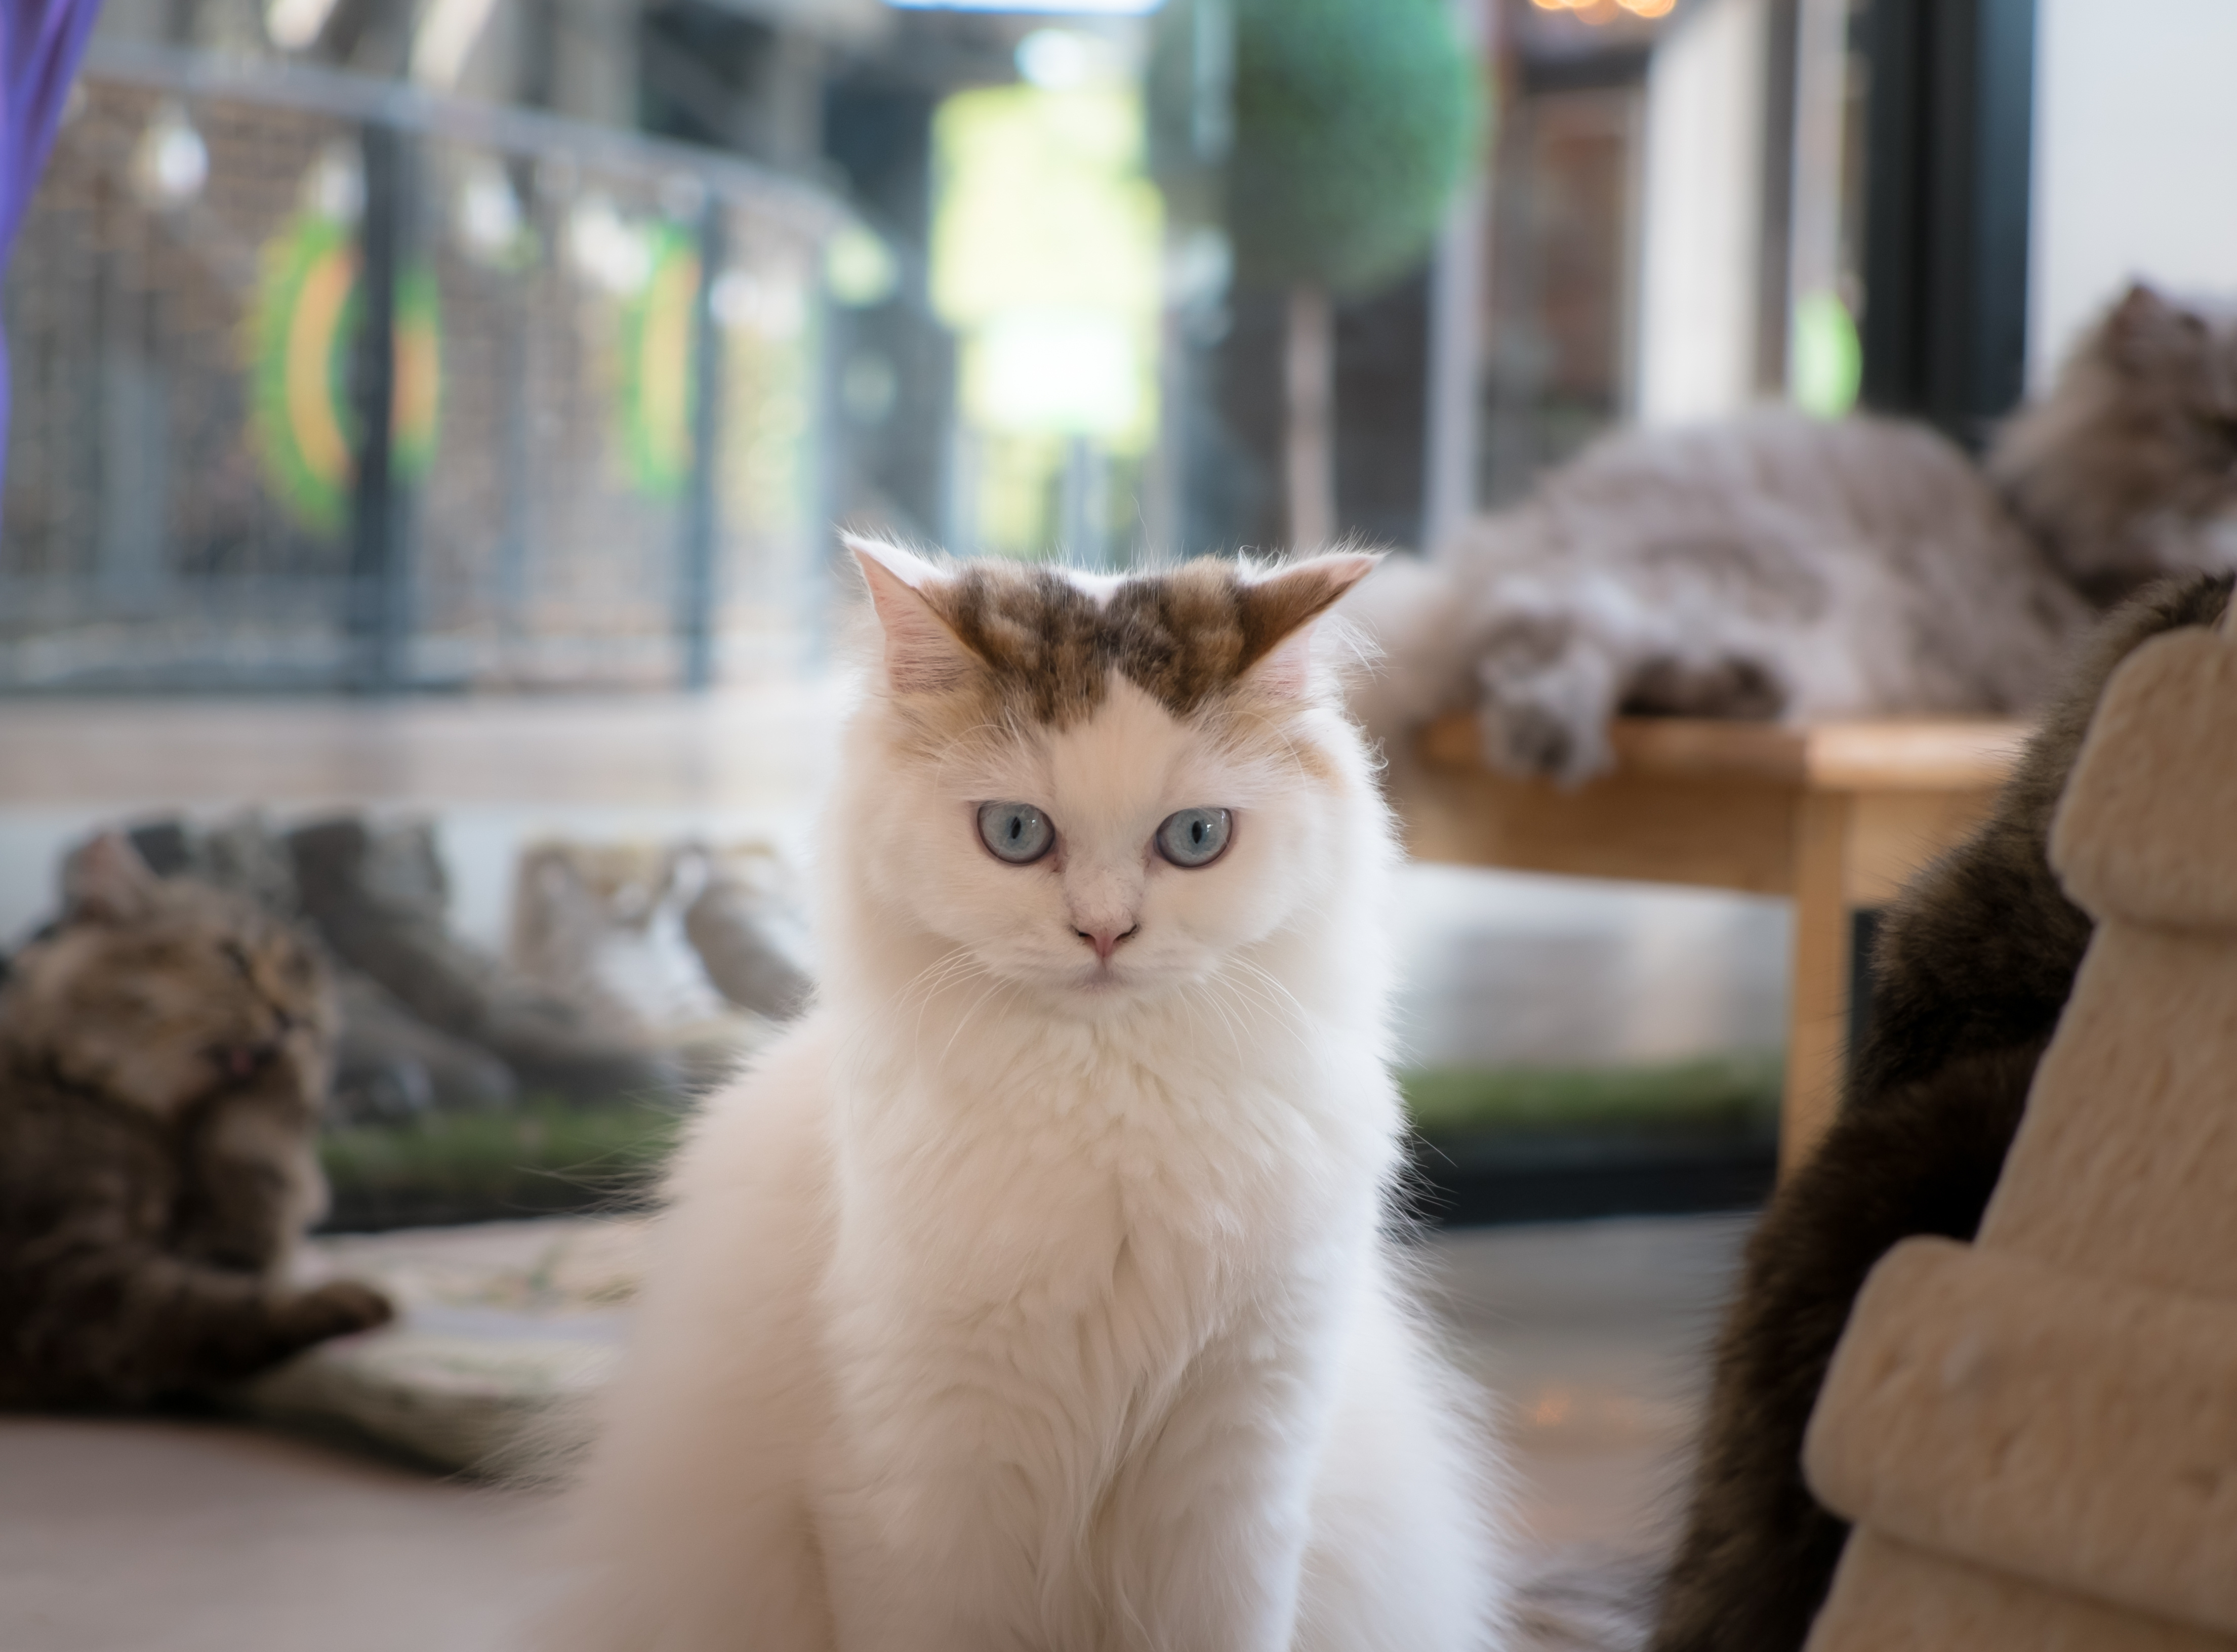 Adorable cat in the cat cafe